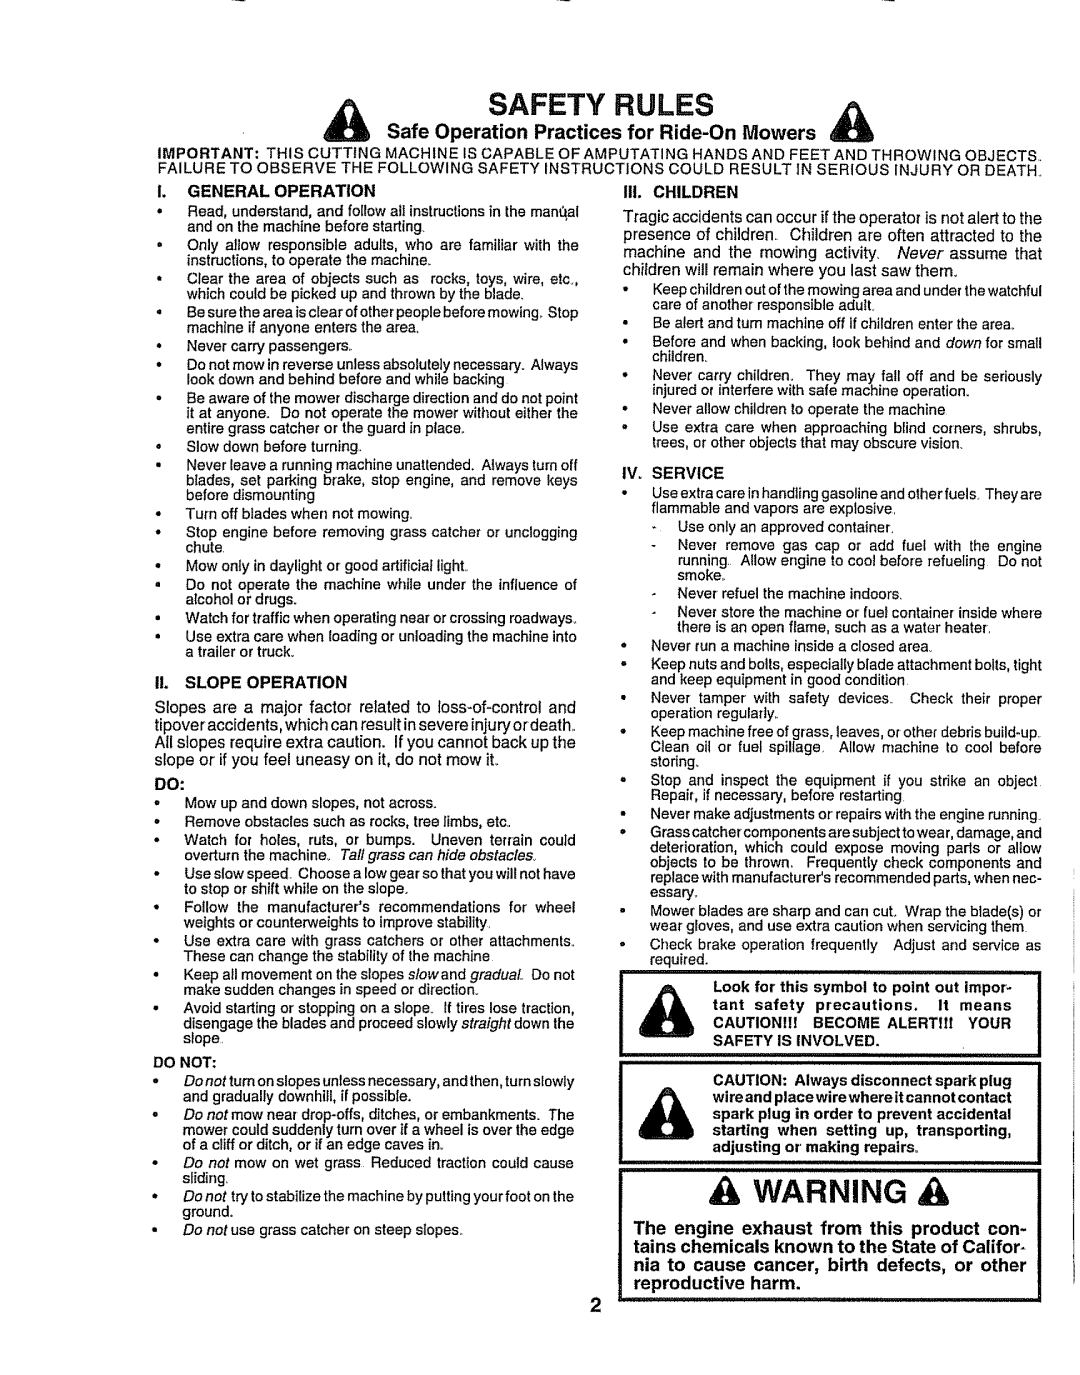 Craftsman 917.258911 owner manual A Warning, Safety Rules, Safe Operation Practices for Ride-OnMowers, Il Slope Operation 